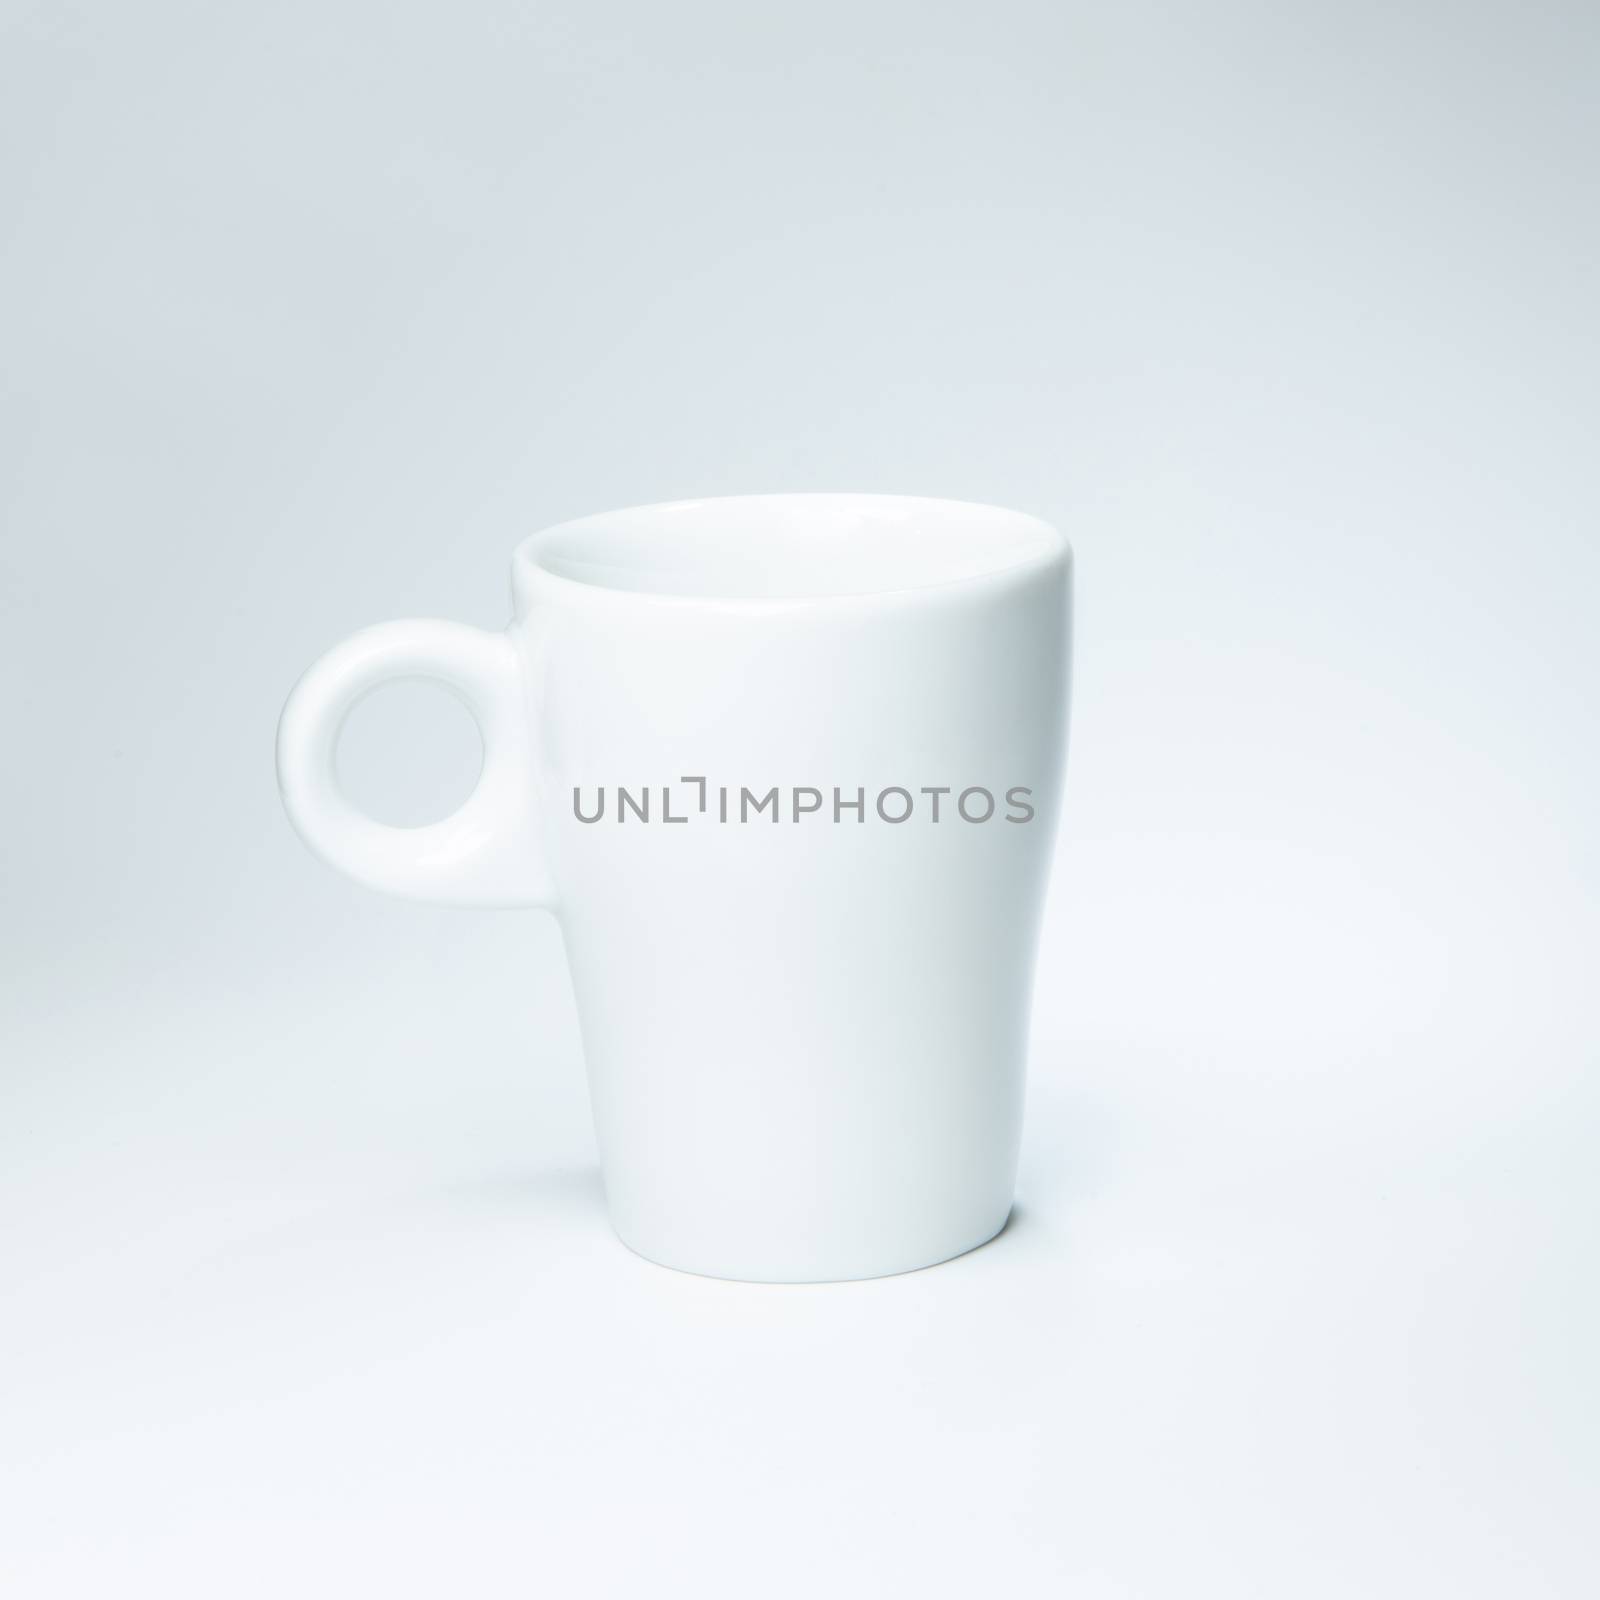 clean coffee cup on white background